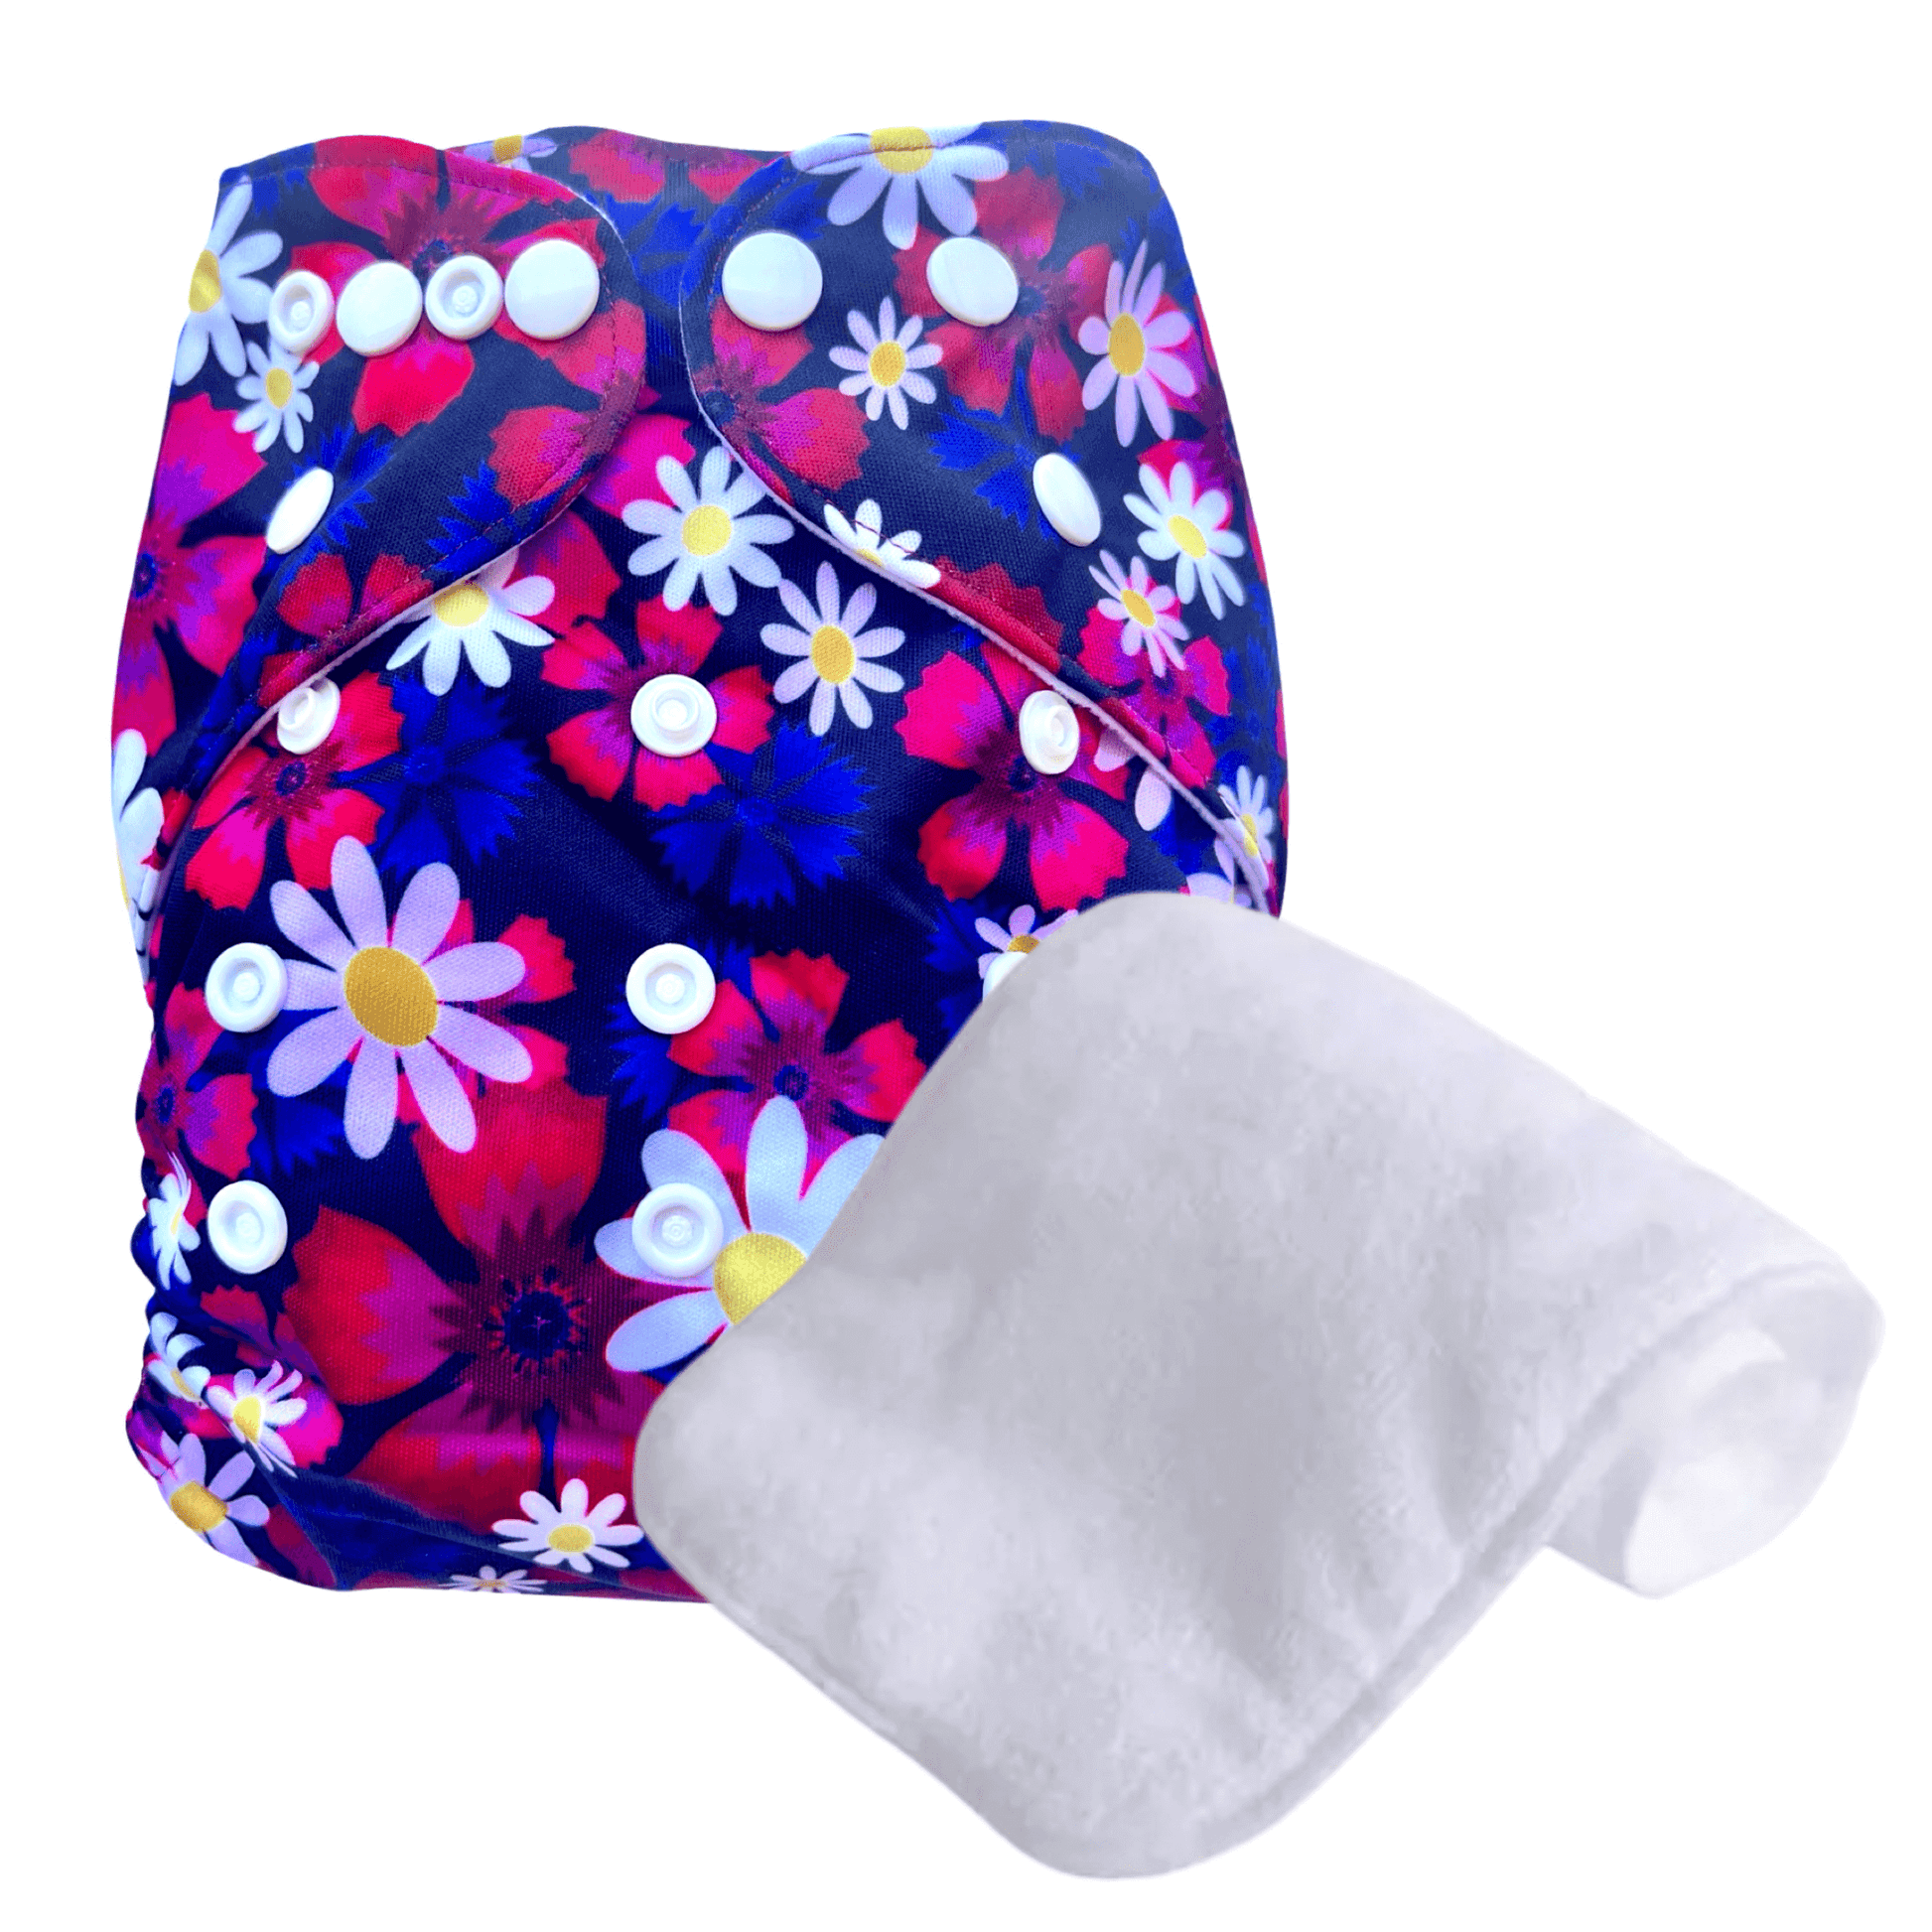 Reusable Cloth Nappy with Insert